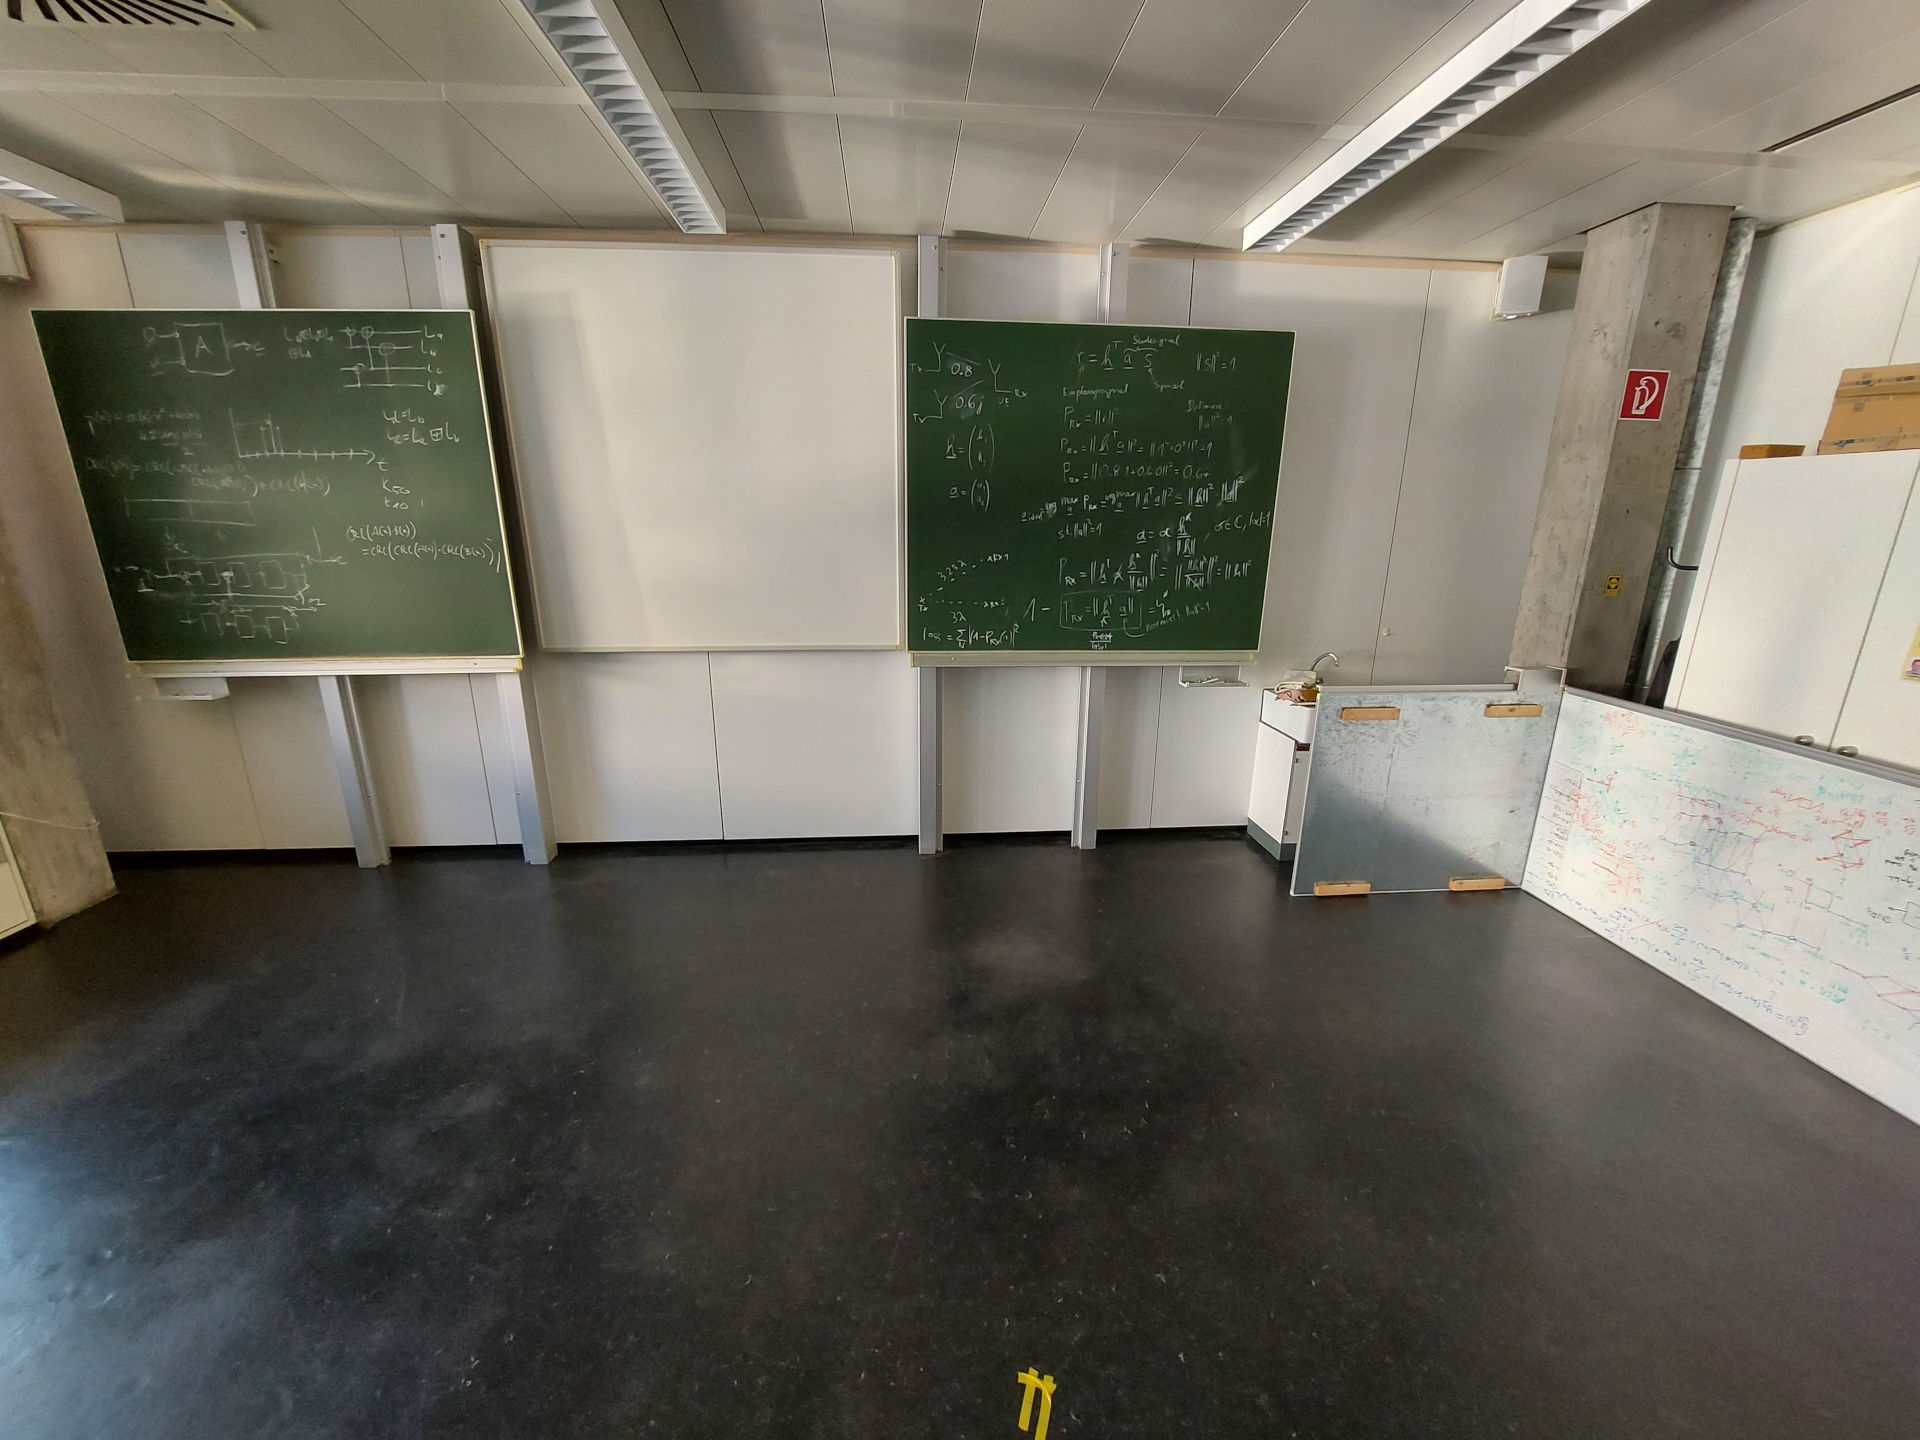 Picture of room in which experiment was carried out